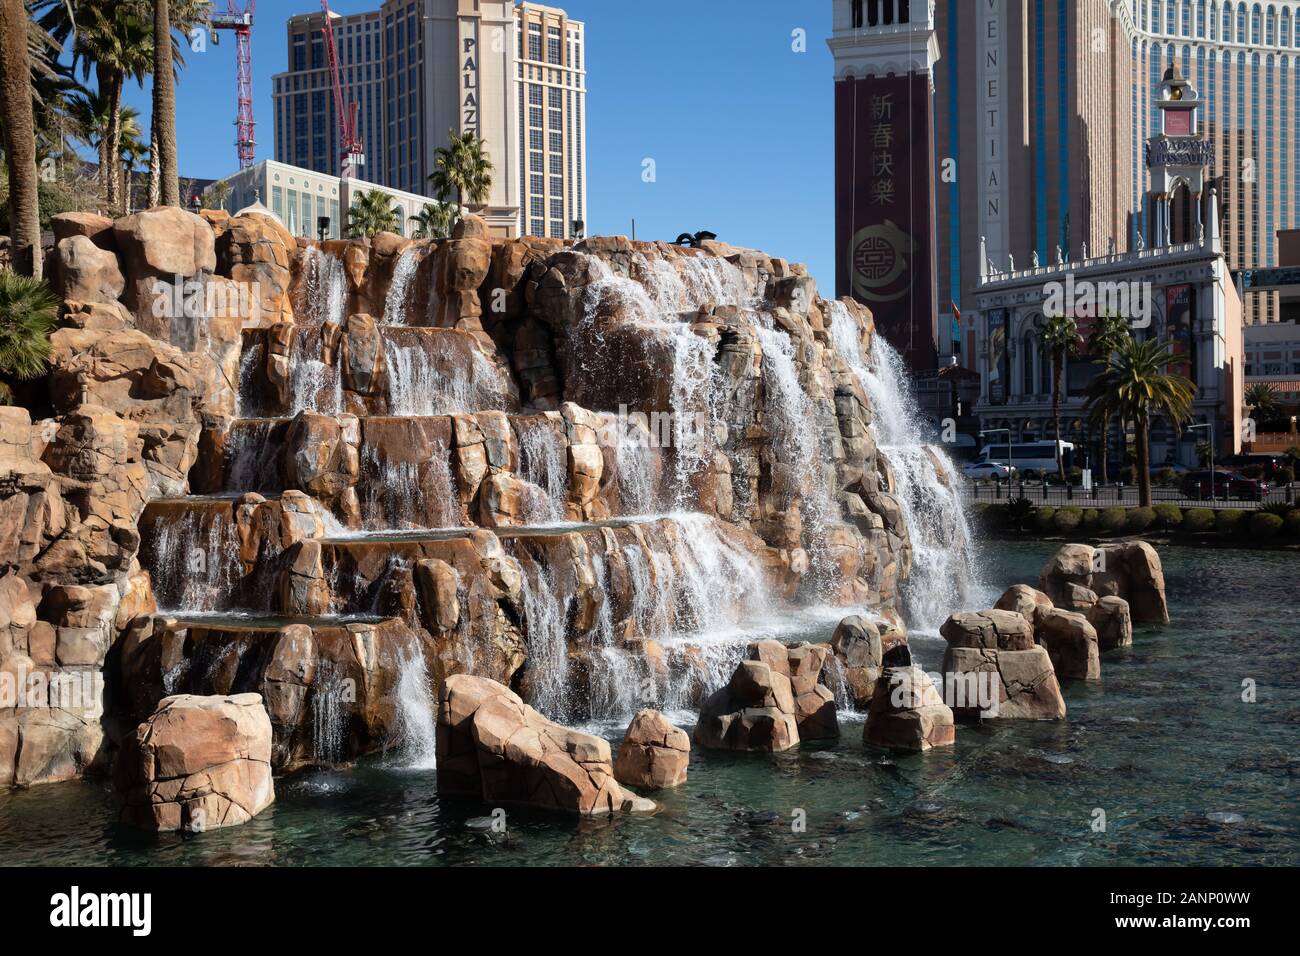 Mirage hotel Water feature in Las Vegas, Nevada, USA Stock Photo